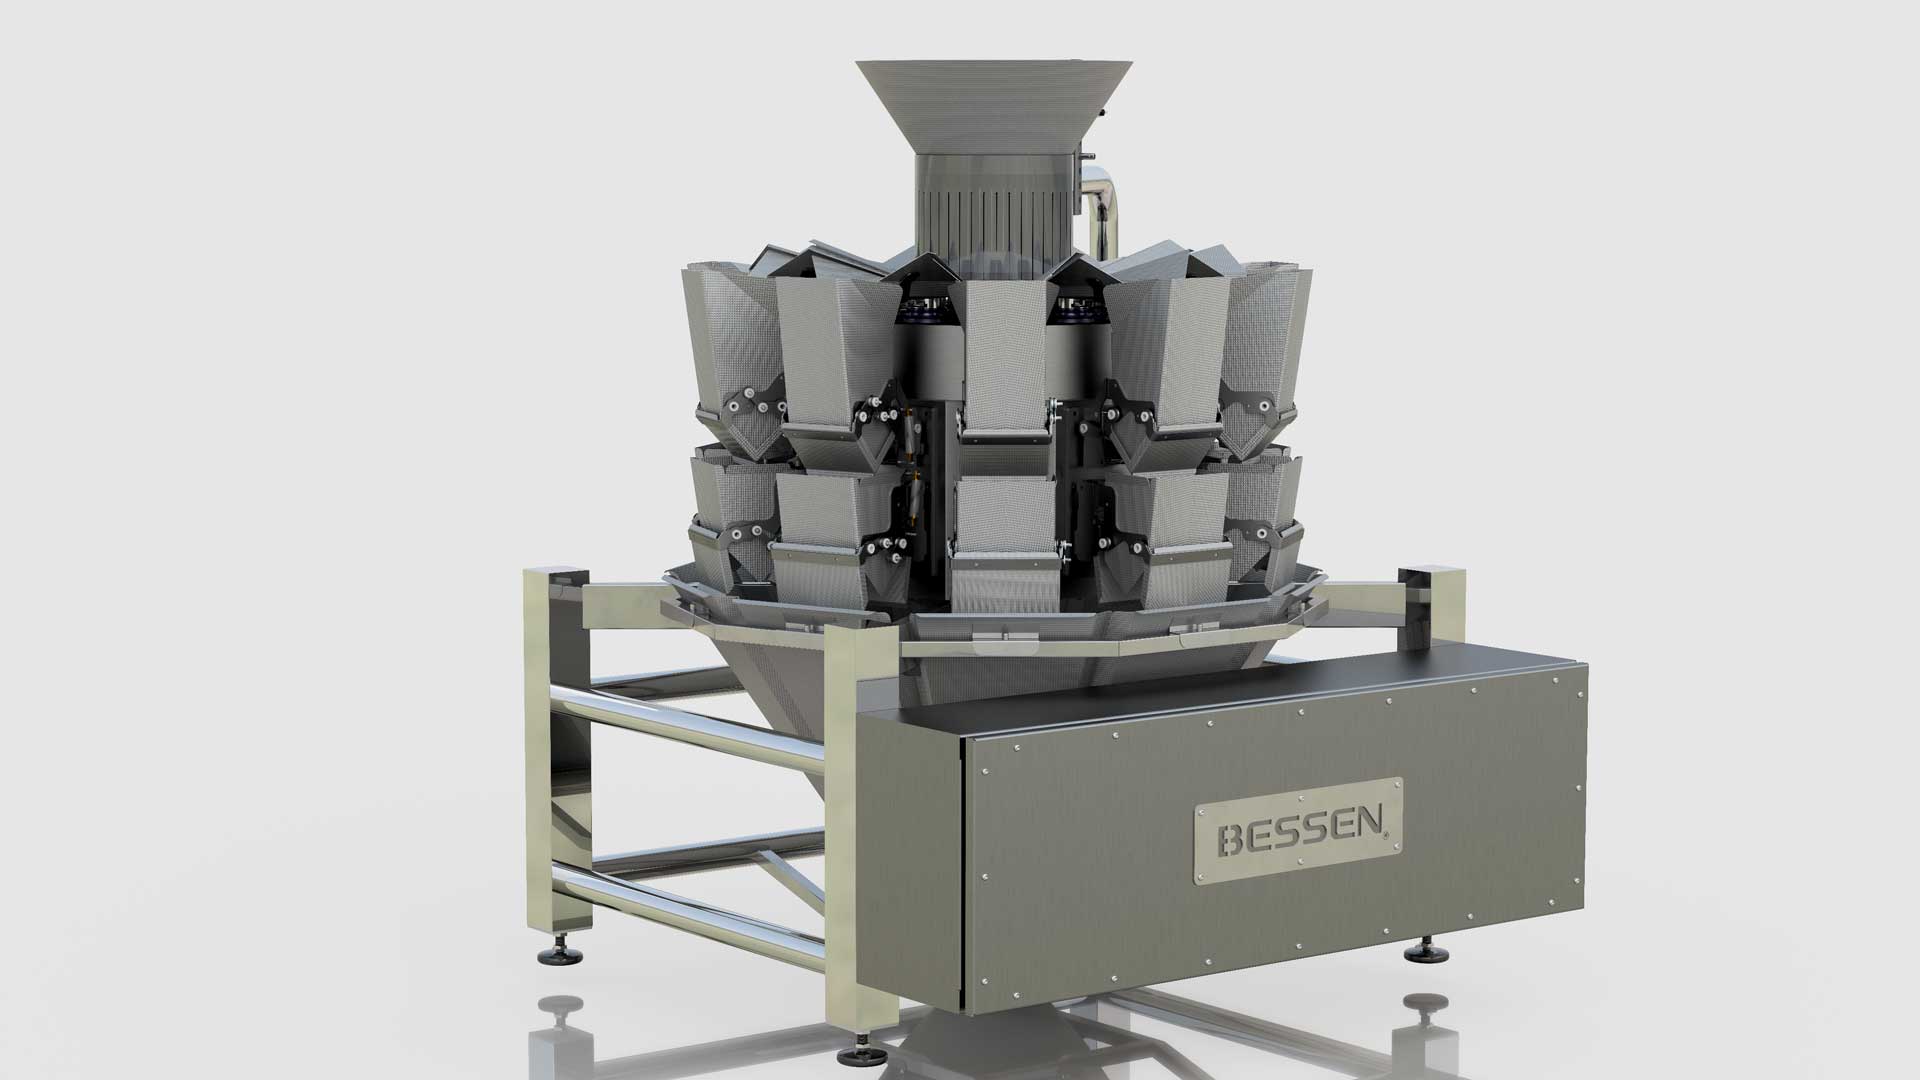 Combination scale by Bessen, featuring multiple weighing buckets and a user-friendly interface, designed for precise weighing and portioning of various products.